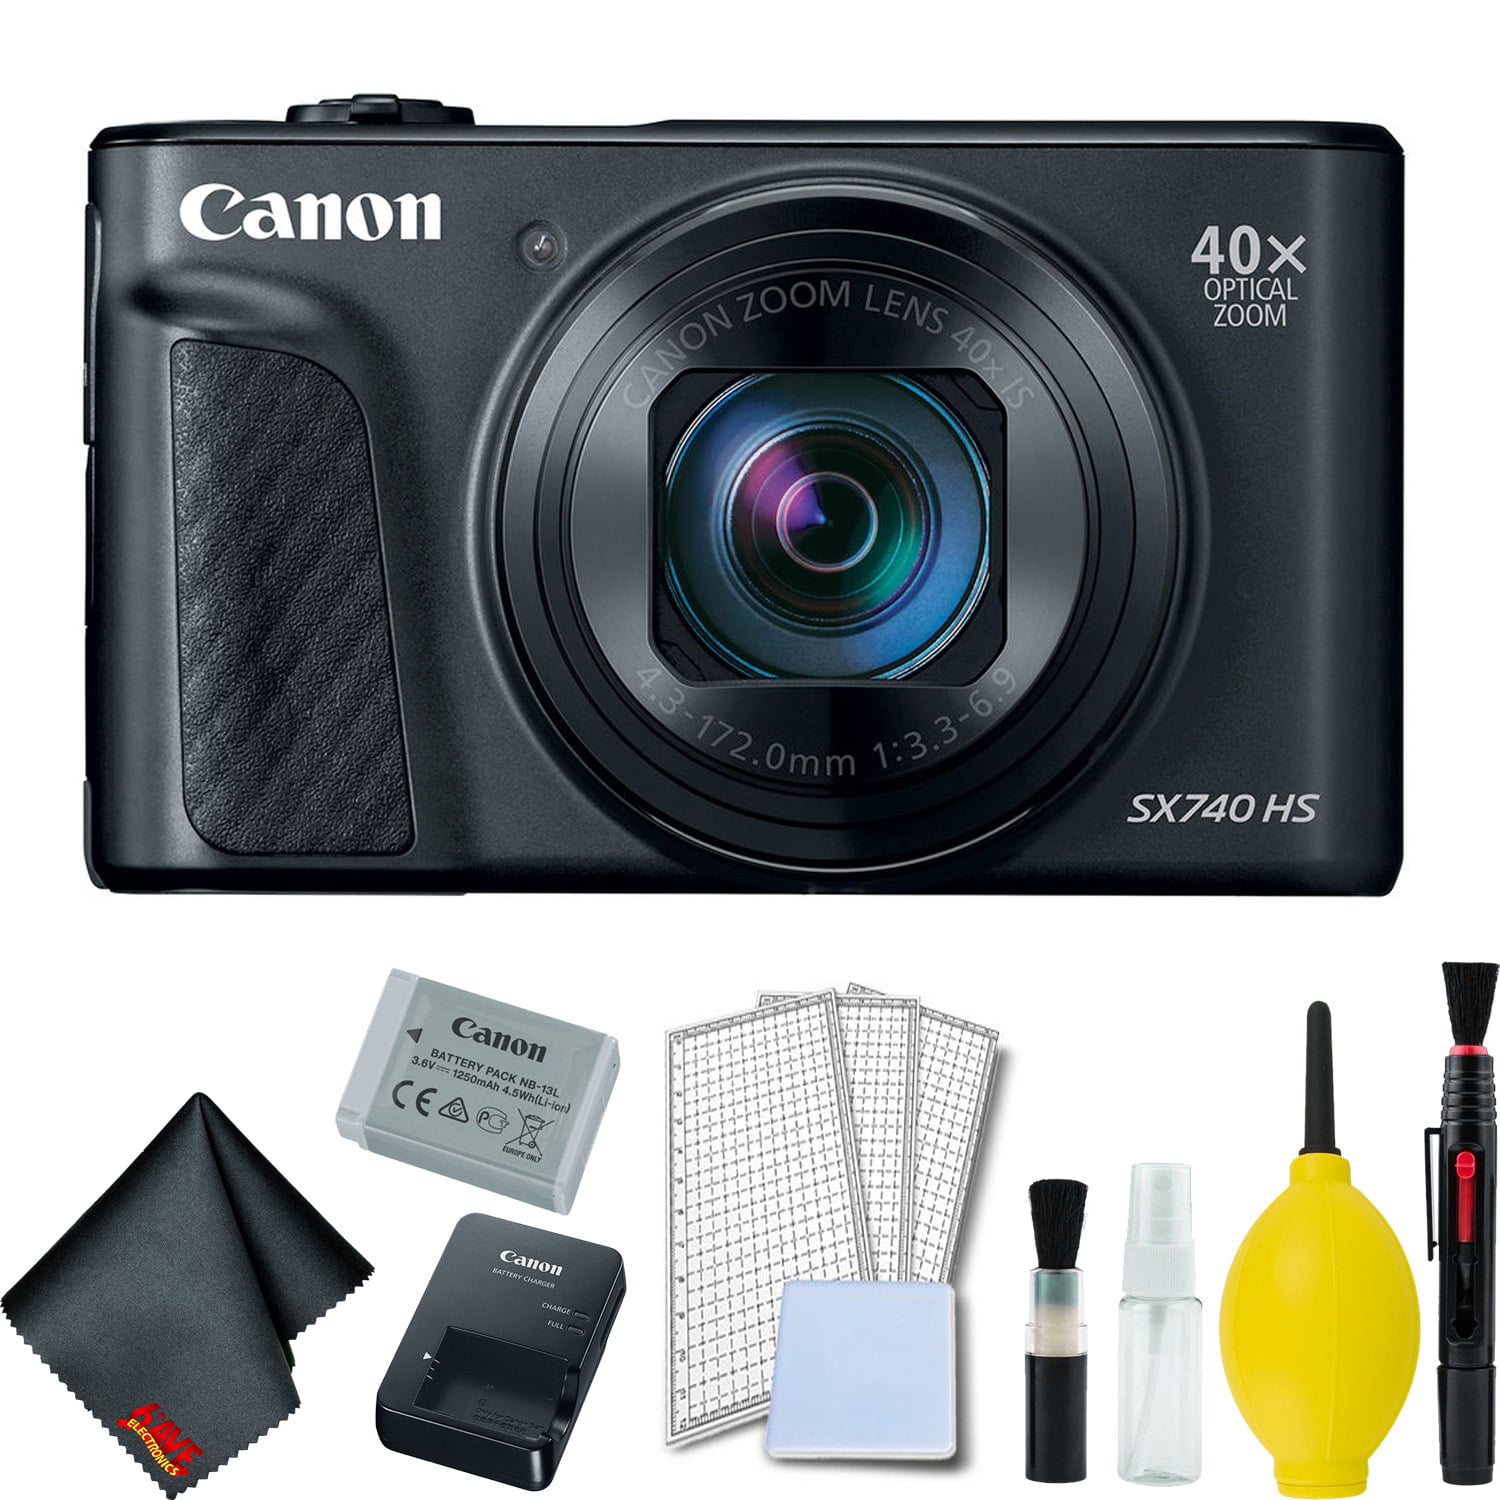 CANON POWERSHOT SX740 HS PRINTED USER MANUAL GUIDE INSTRUCTIONS FULL COLOUR 